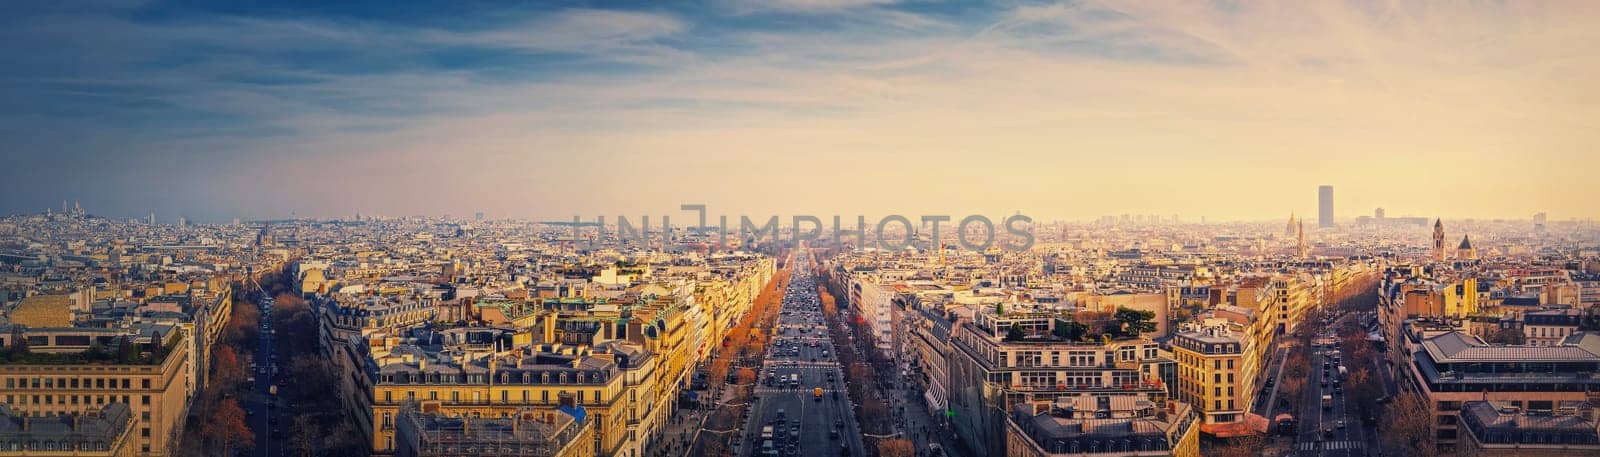 Paris cityscape sunset panorama from the triumphal arch with view to parisian avenues and Champs-Elysee in the center. Beautiful architectural landmarks on the horizon by psychoshadow